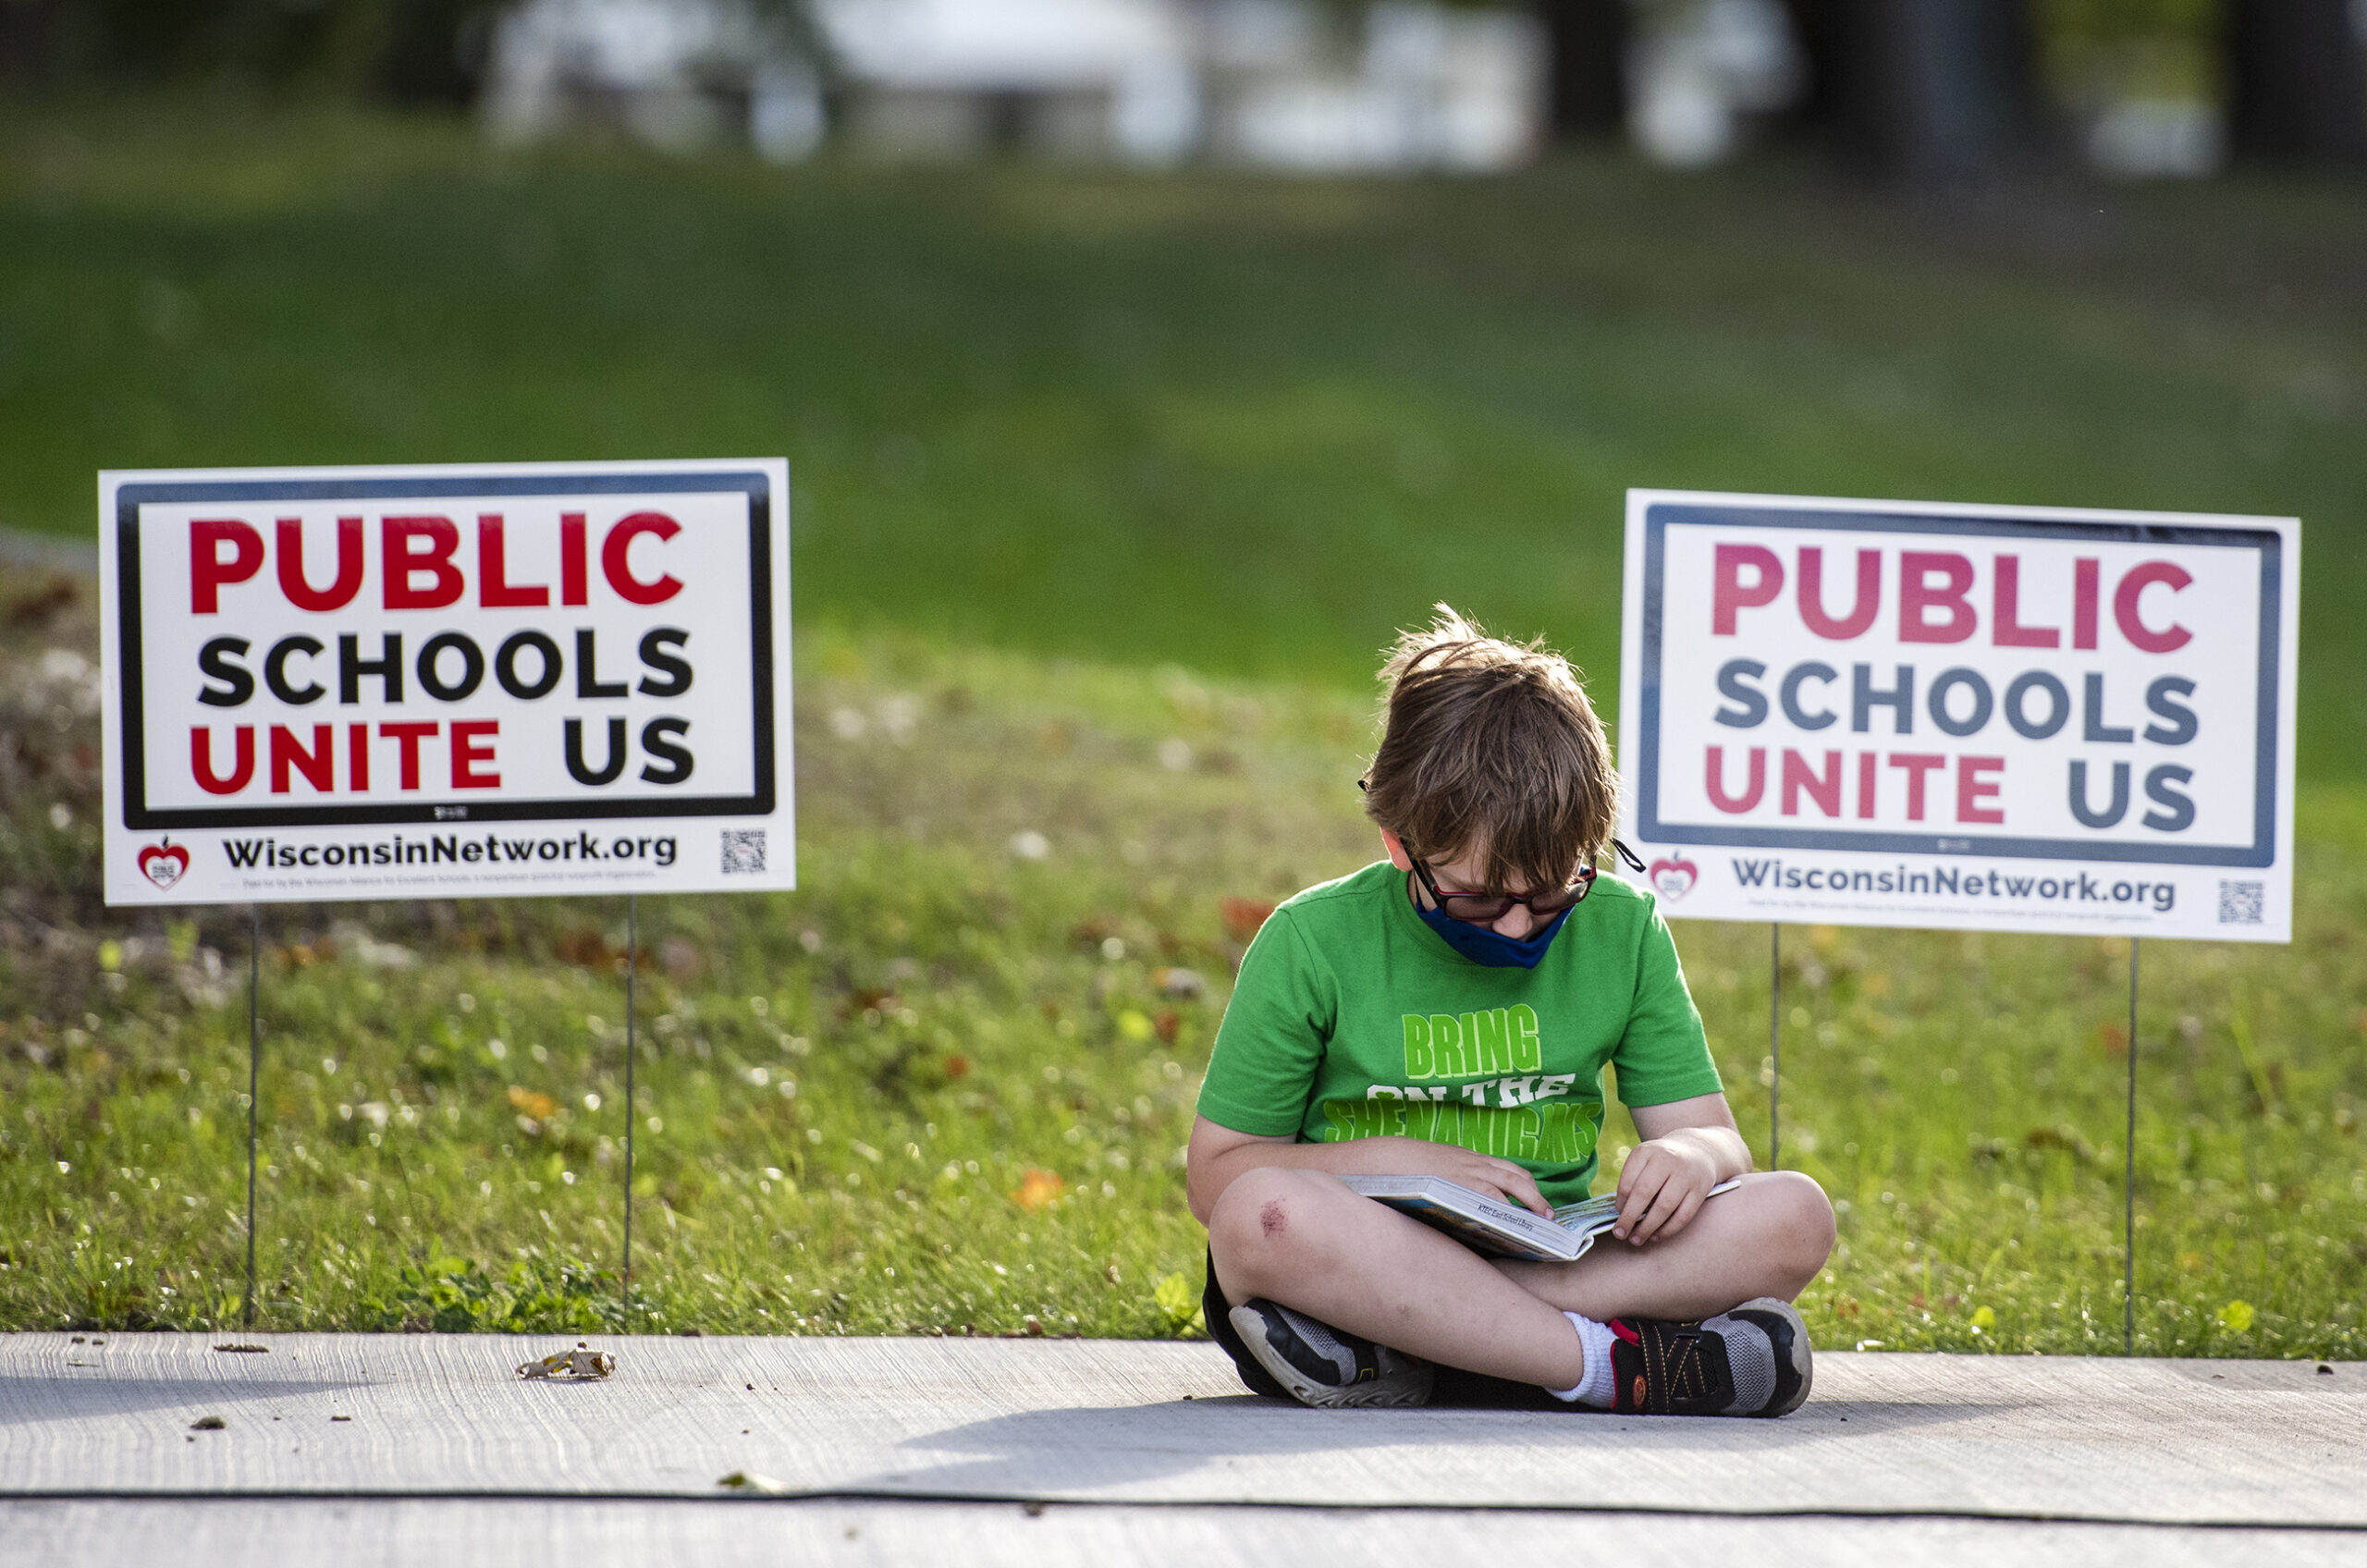 A child in a green t-shirt sits on the ground outside with his head in a book.